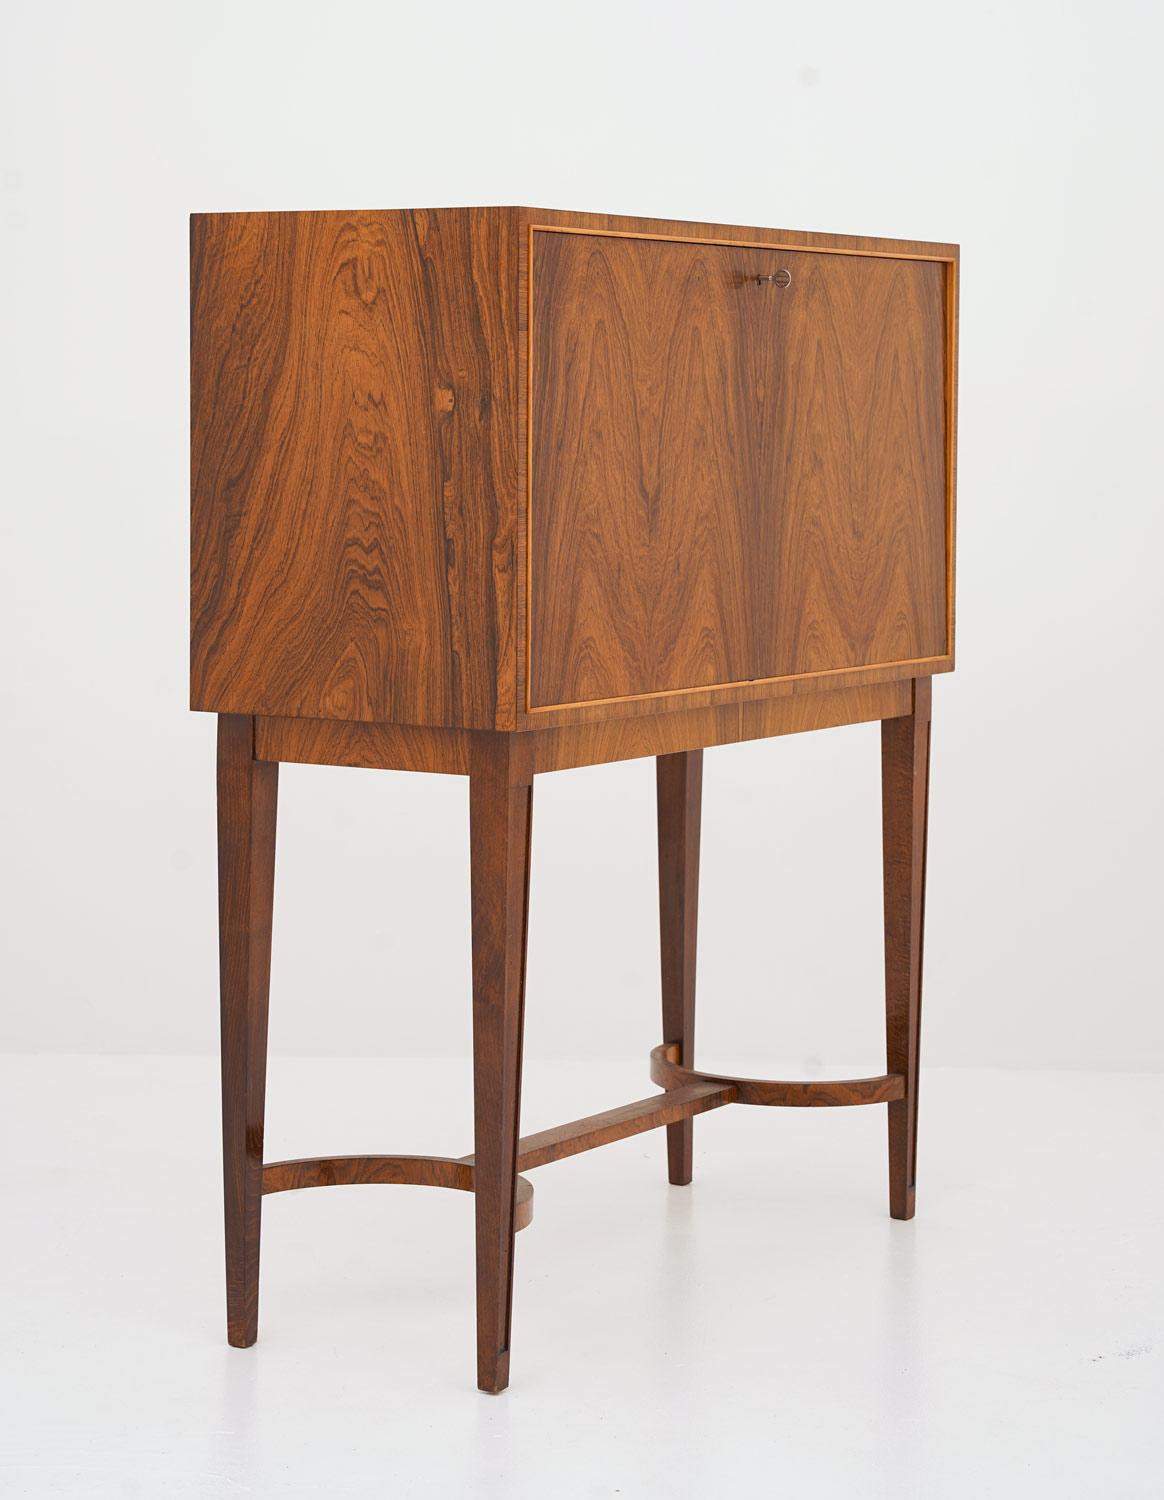 Stunning bar cabinet manufactured in Sweden, 1930s.
This bar cabinet is made with an impressive sense for material and design. The rosewood veneer creates a dramatic pattern on the front, and surrounded by a thin frame of birch it creates perfect